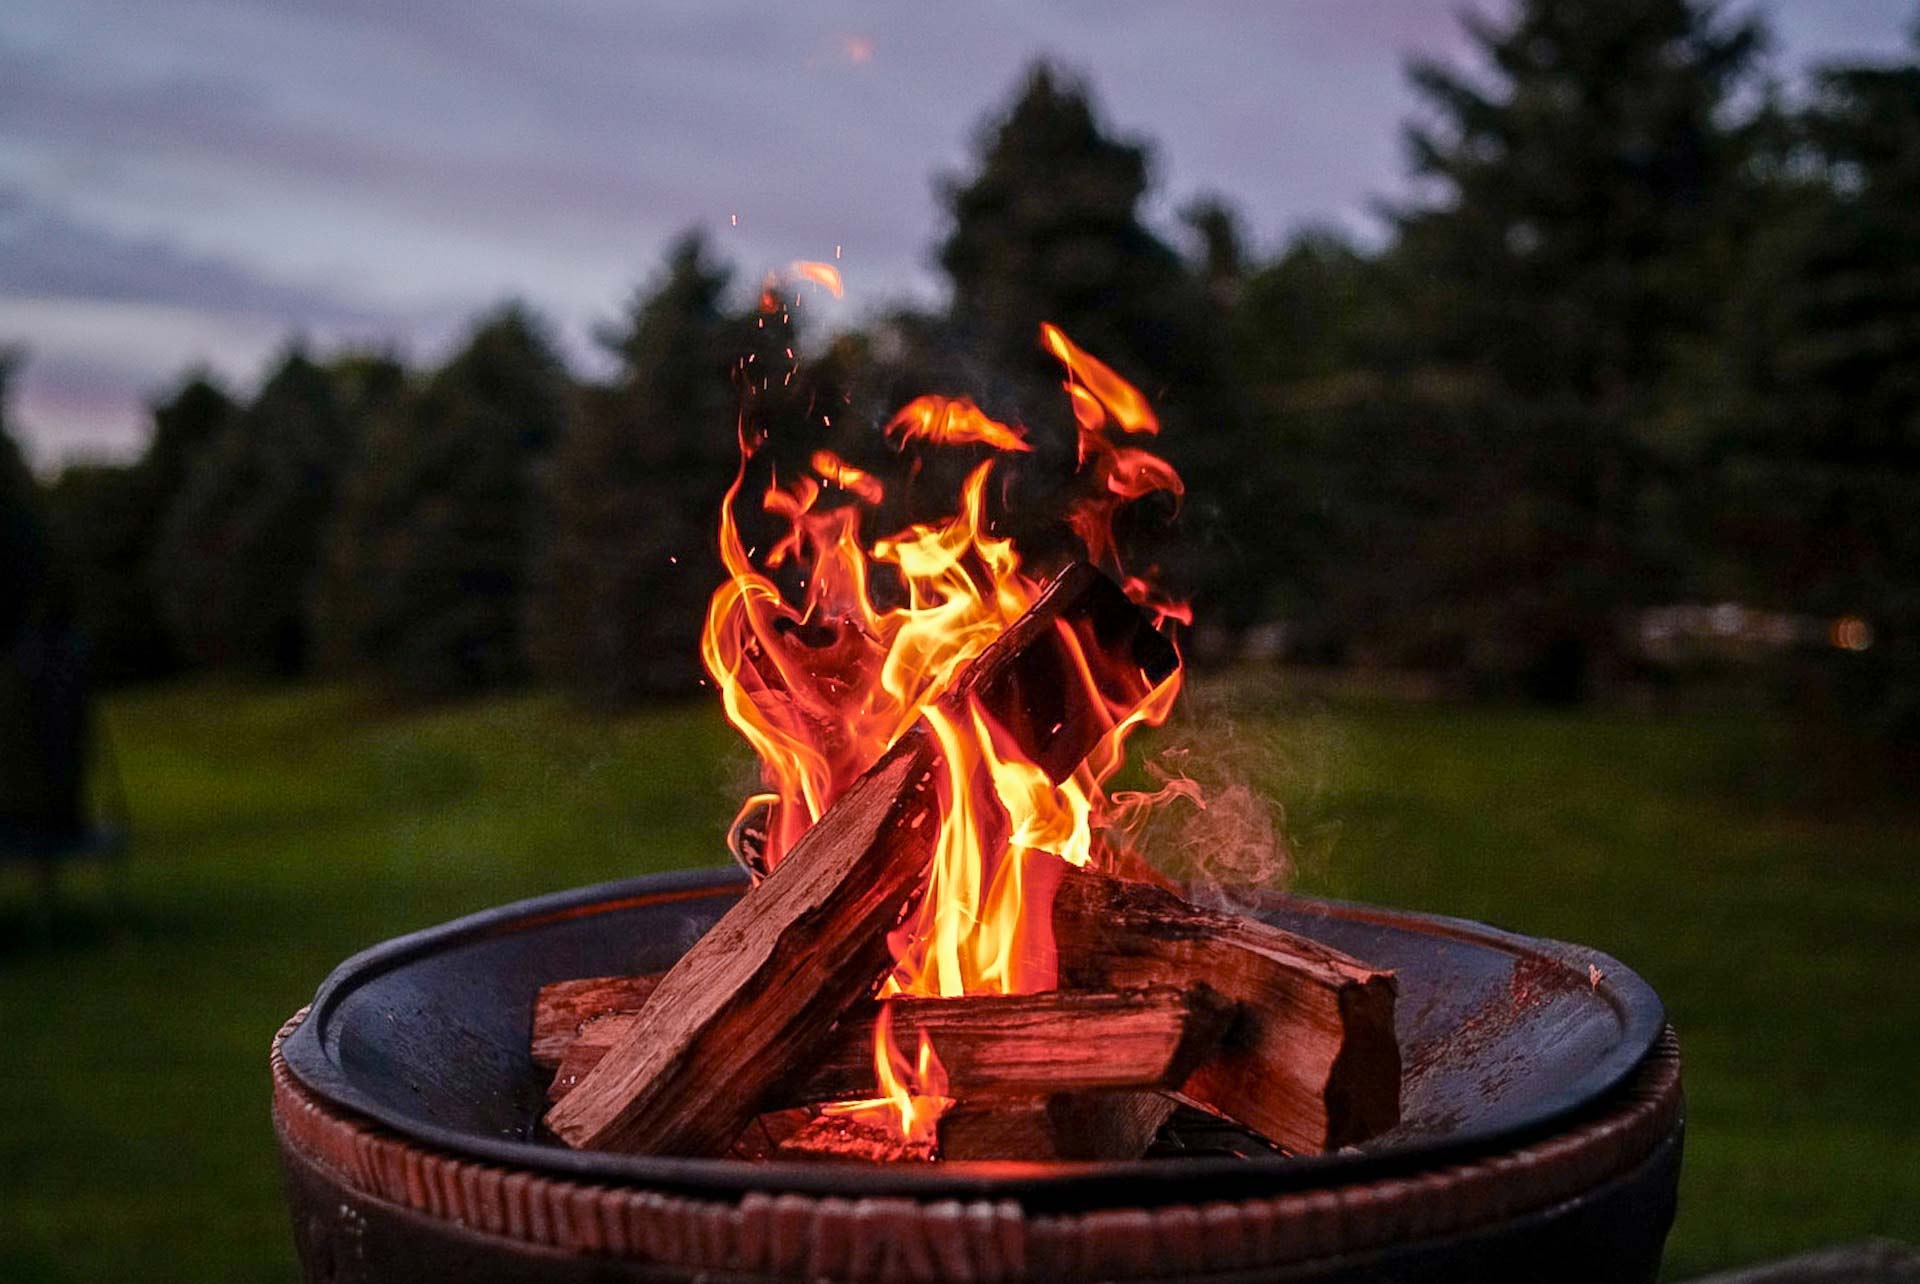 Fire pit with wood on fire